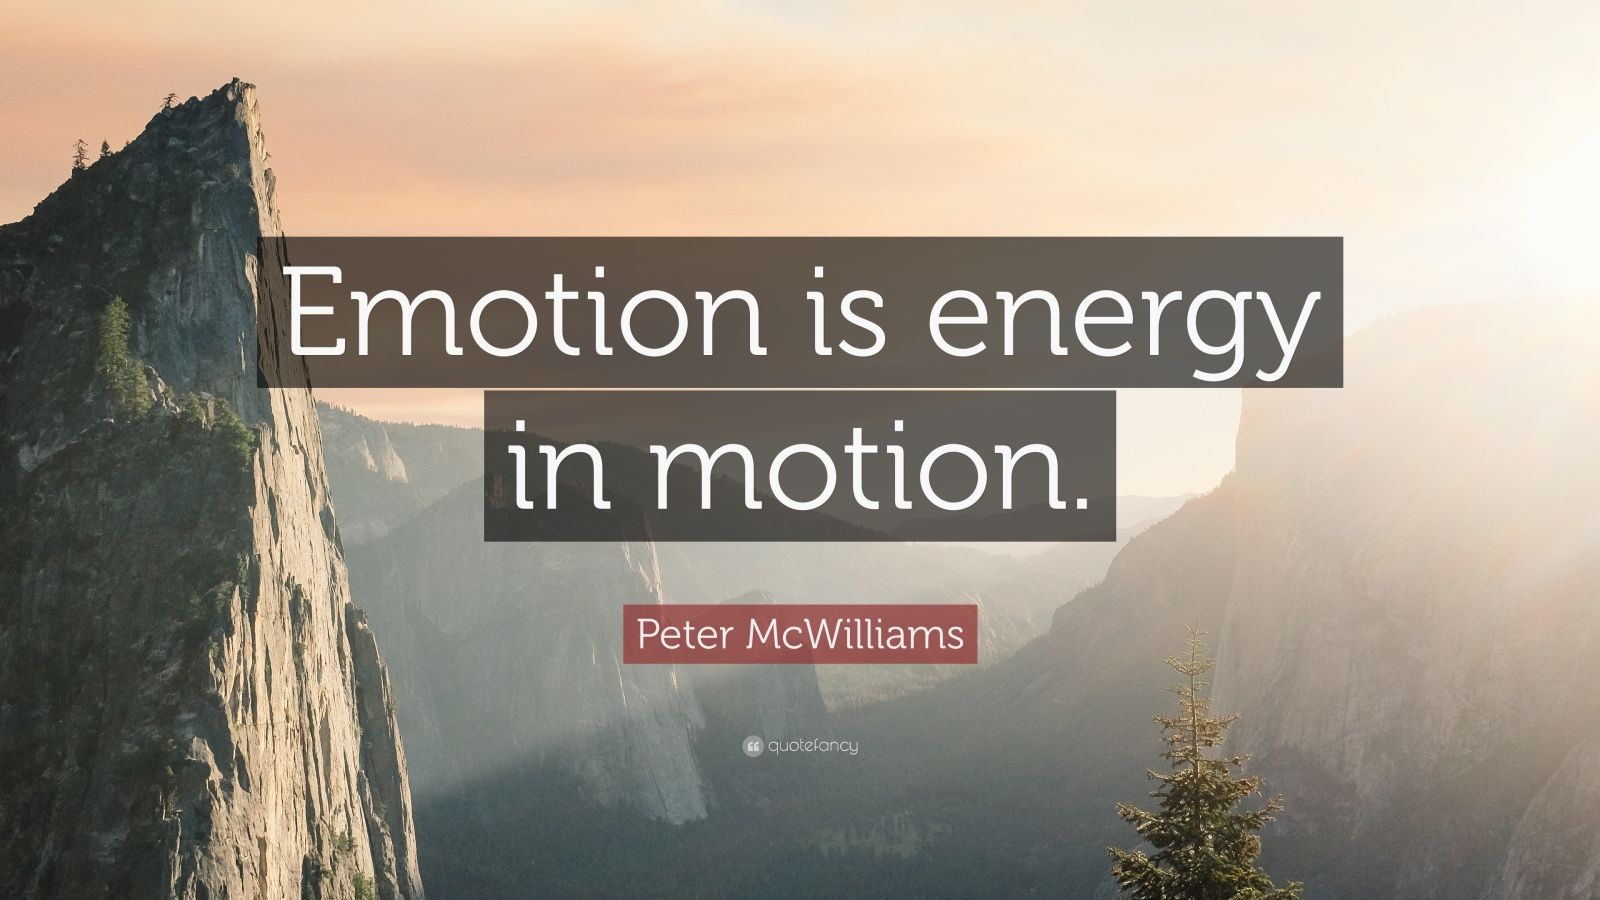 Peter McWilliams Quote: “Emotion is energy in motion.”